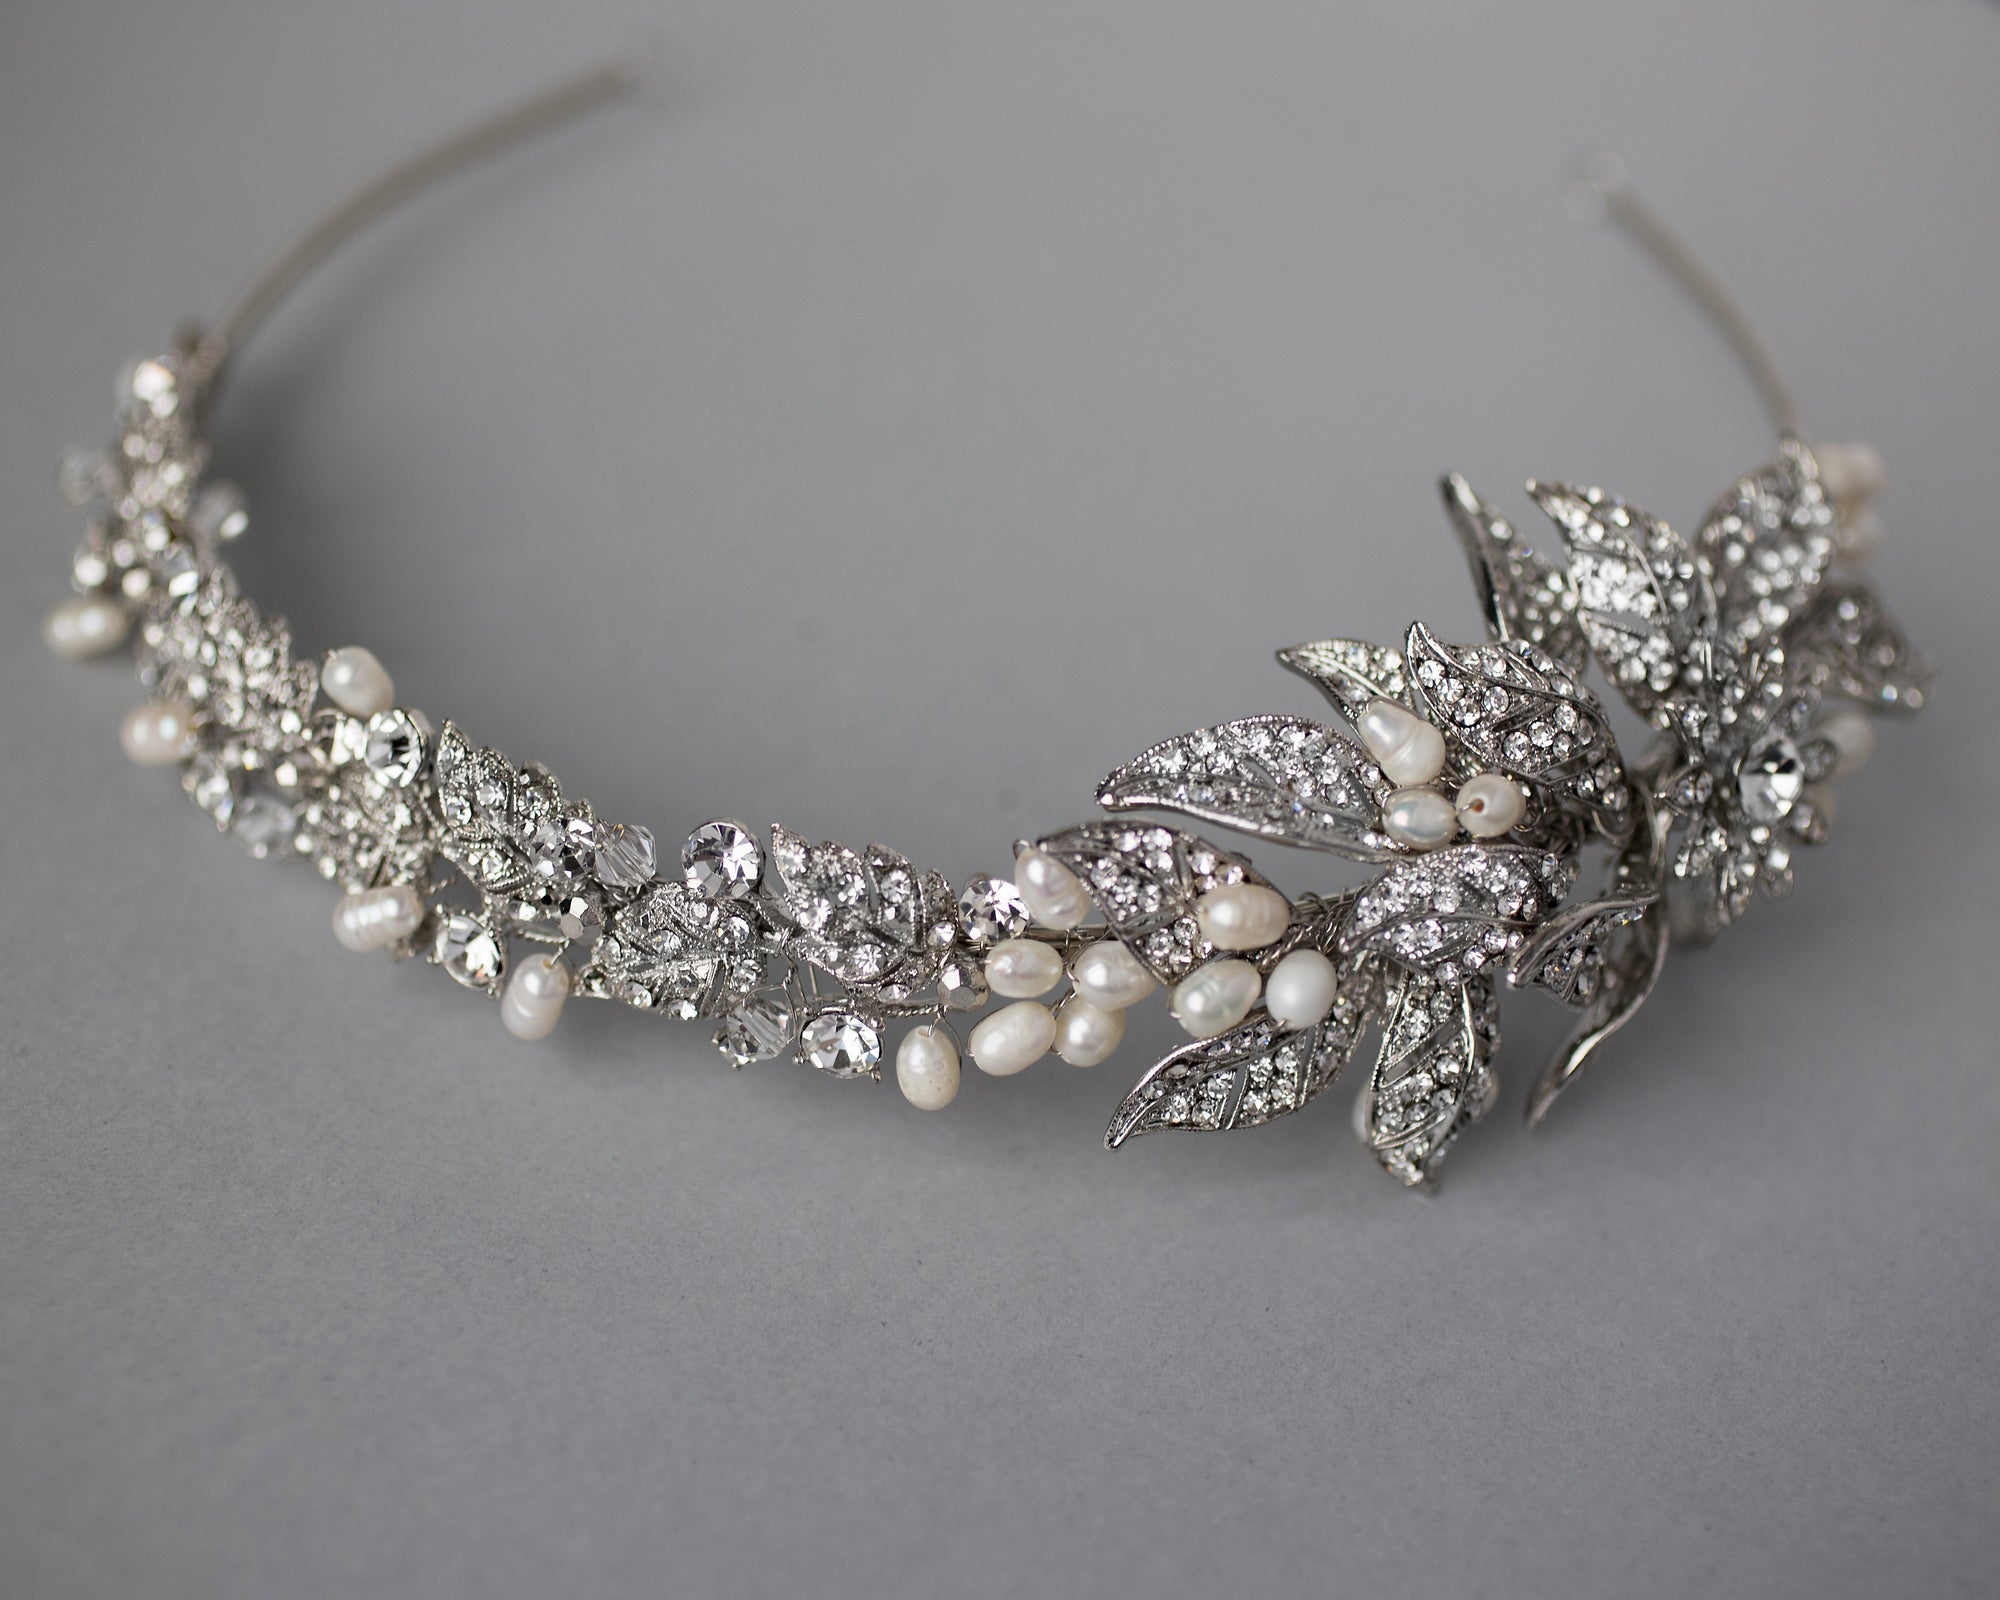 Antique Silver and Pearls Side Accent Headband